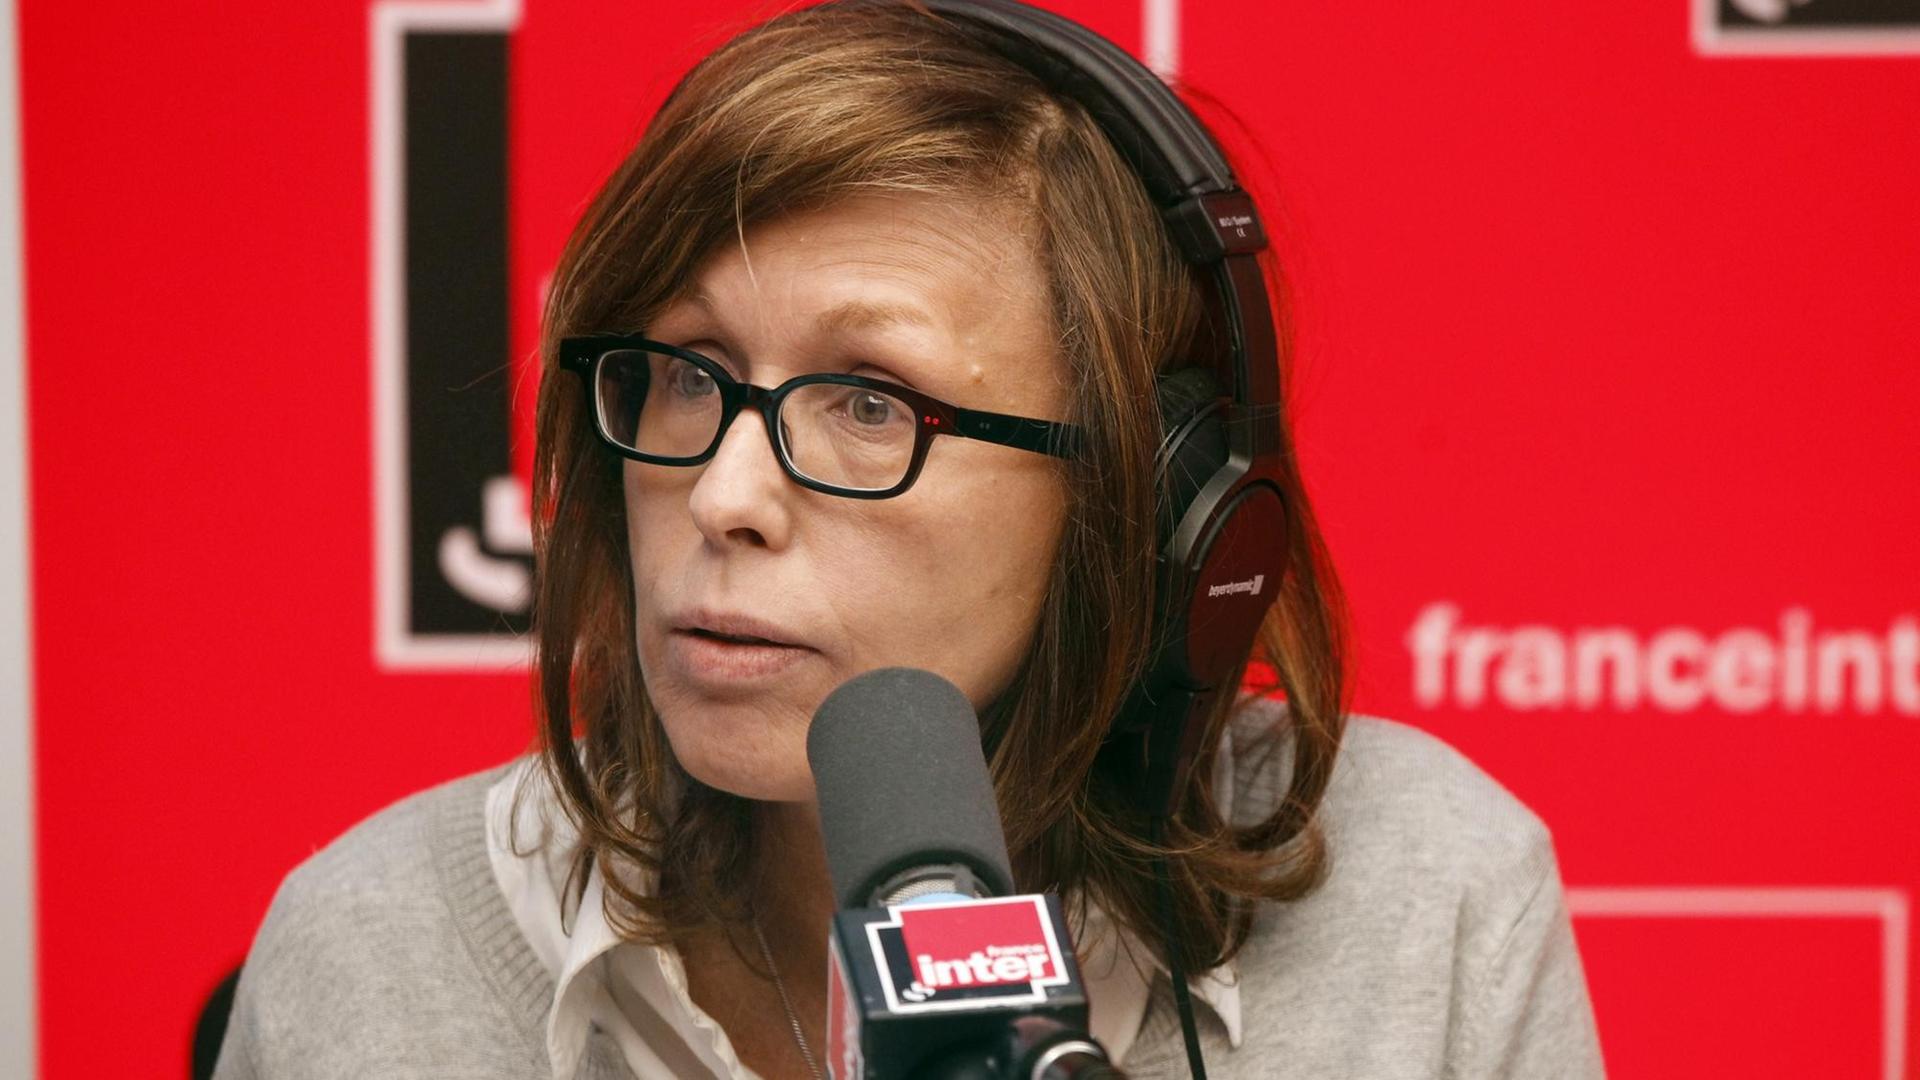 President of French far-right party Front national (FN) and candidate for the 2012 French presidential election is interviewed by journalist Pascale Clark in a political show at French radio station France Inter, on April 19, 2012 in Paris.